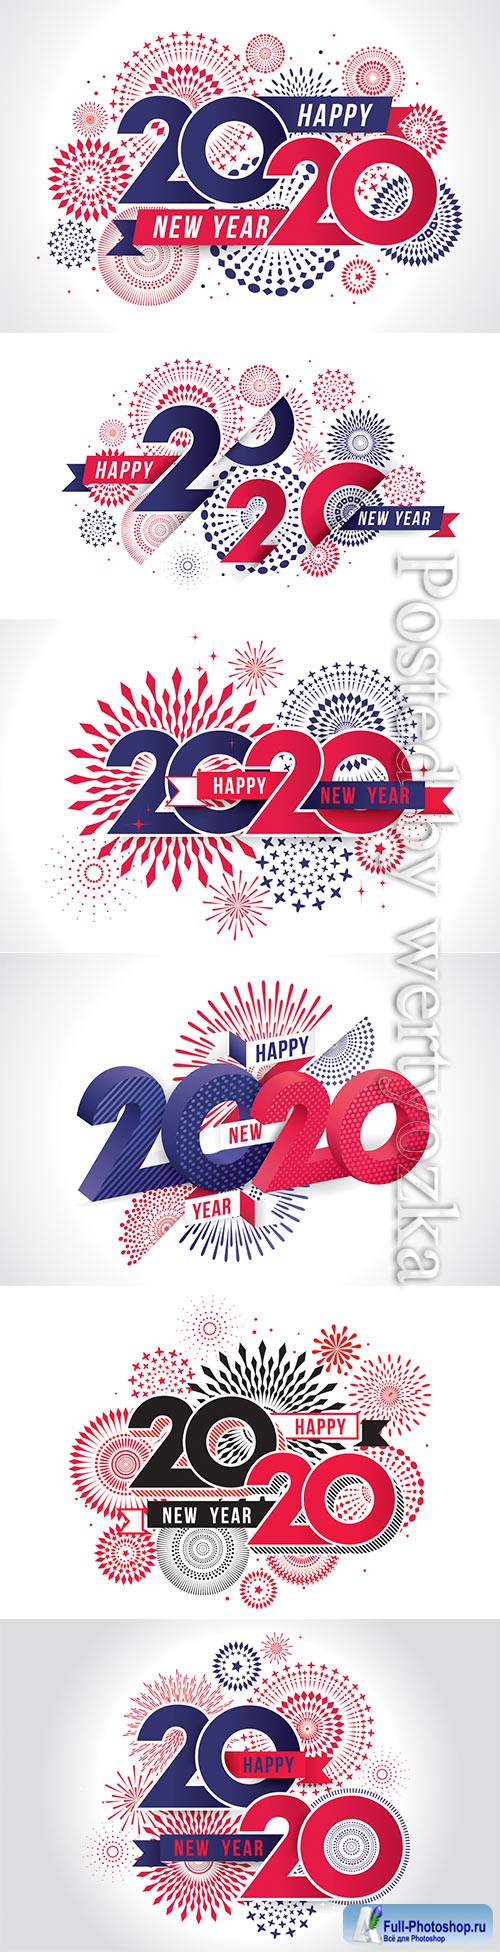 Happy new year 2020 vector illustration of fireworks